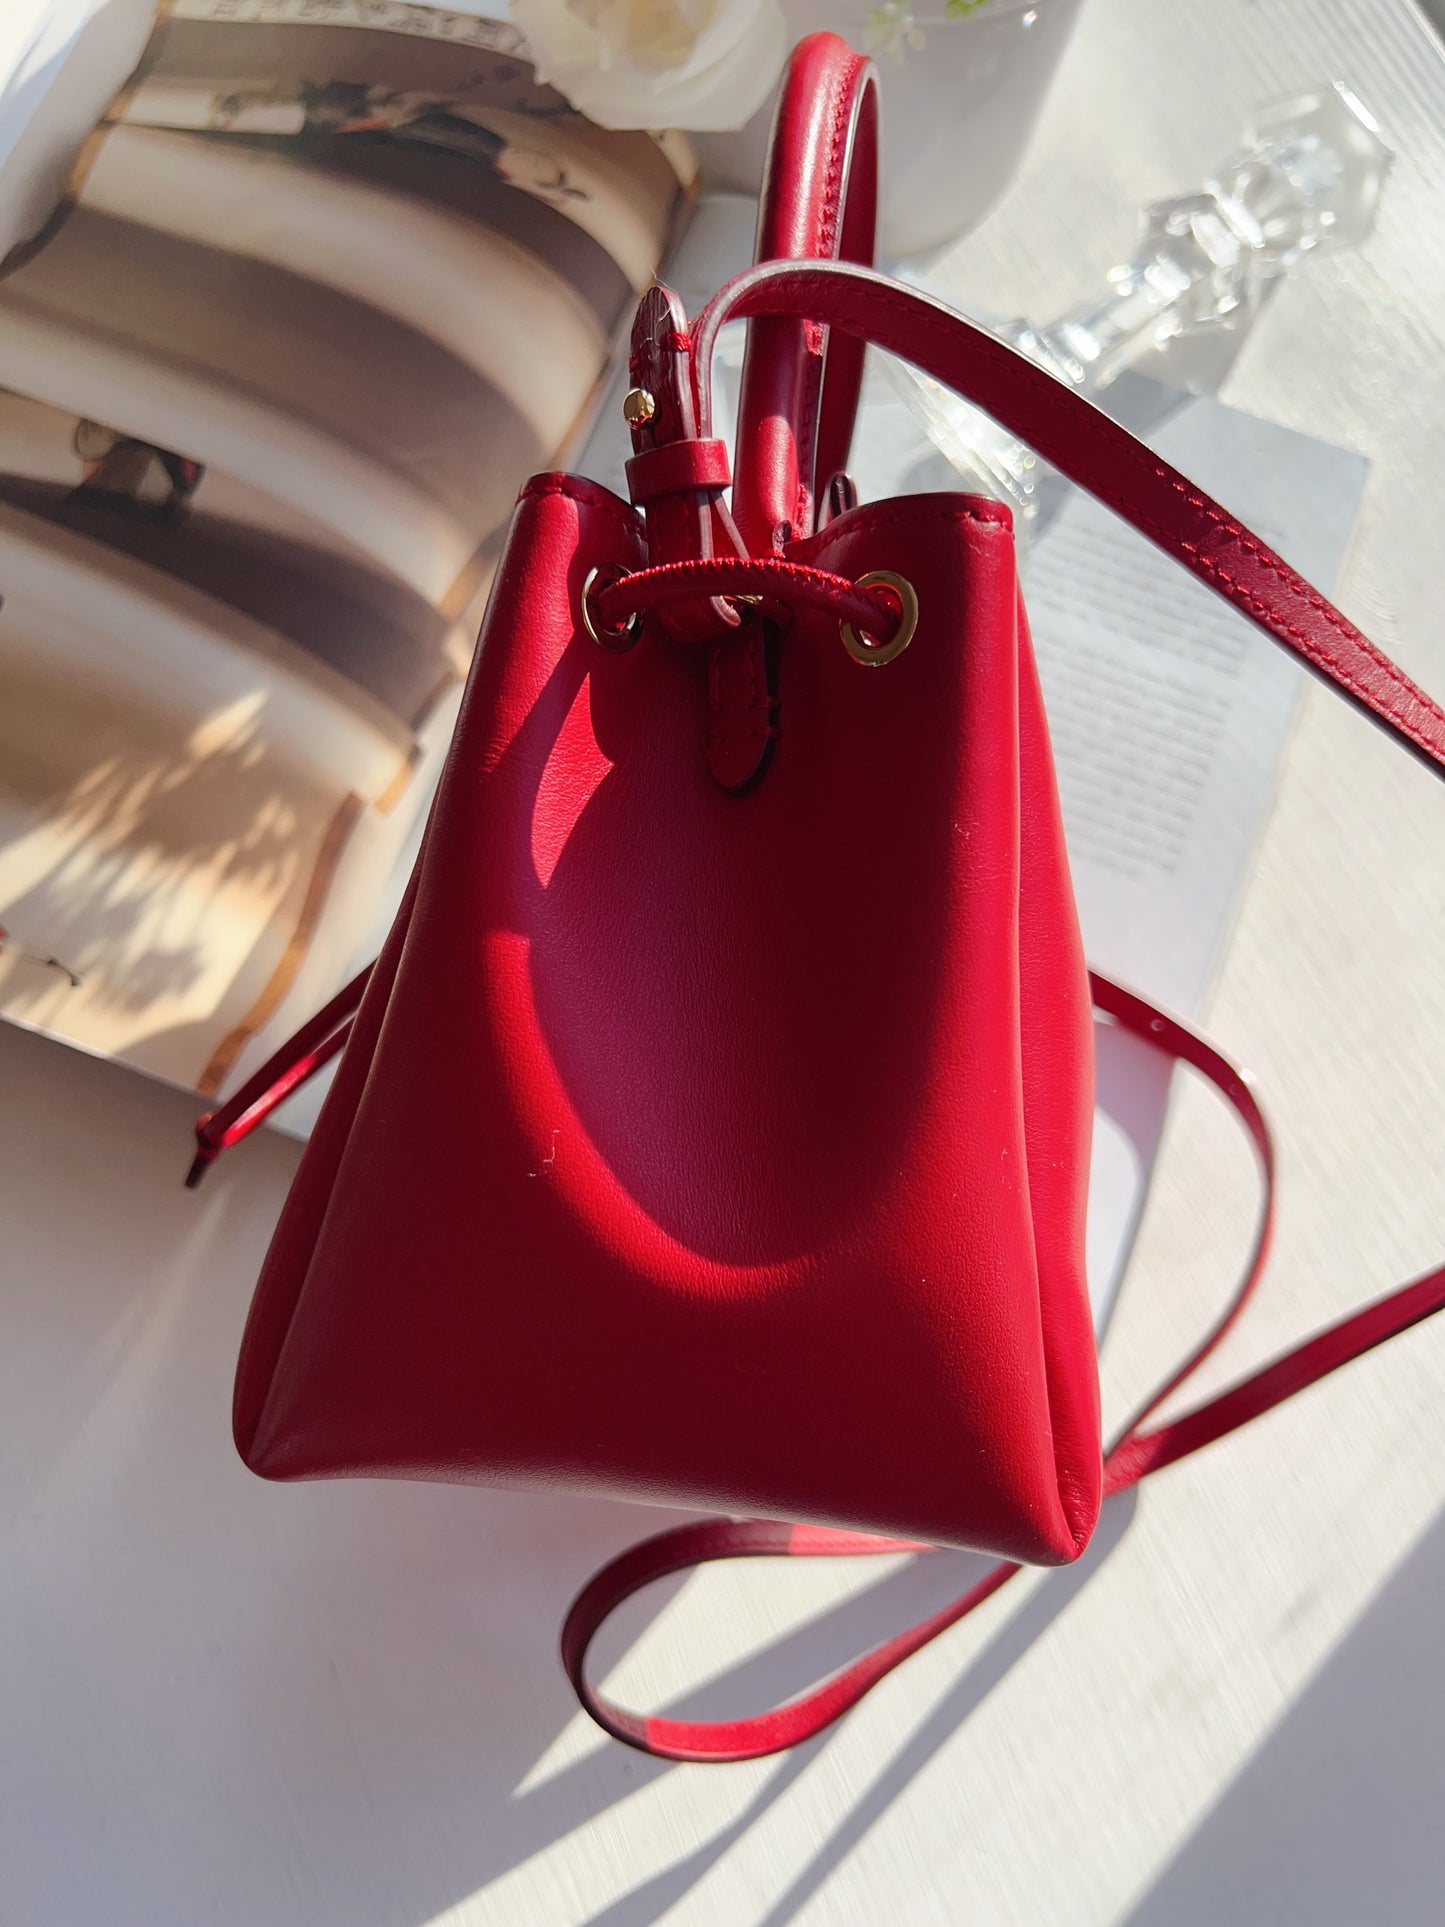 Burberry Burberry Red Leather Peony Drawstring Bucket Bag